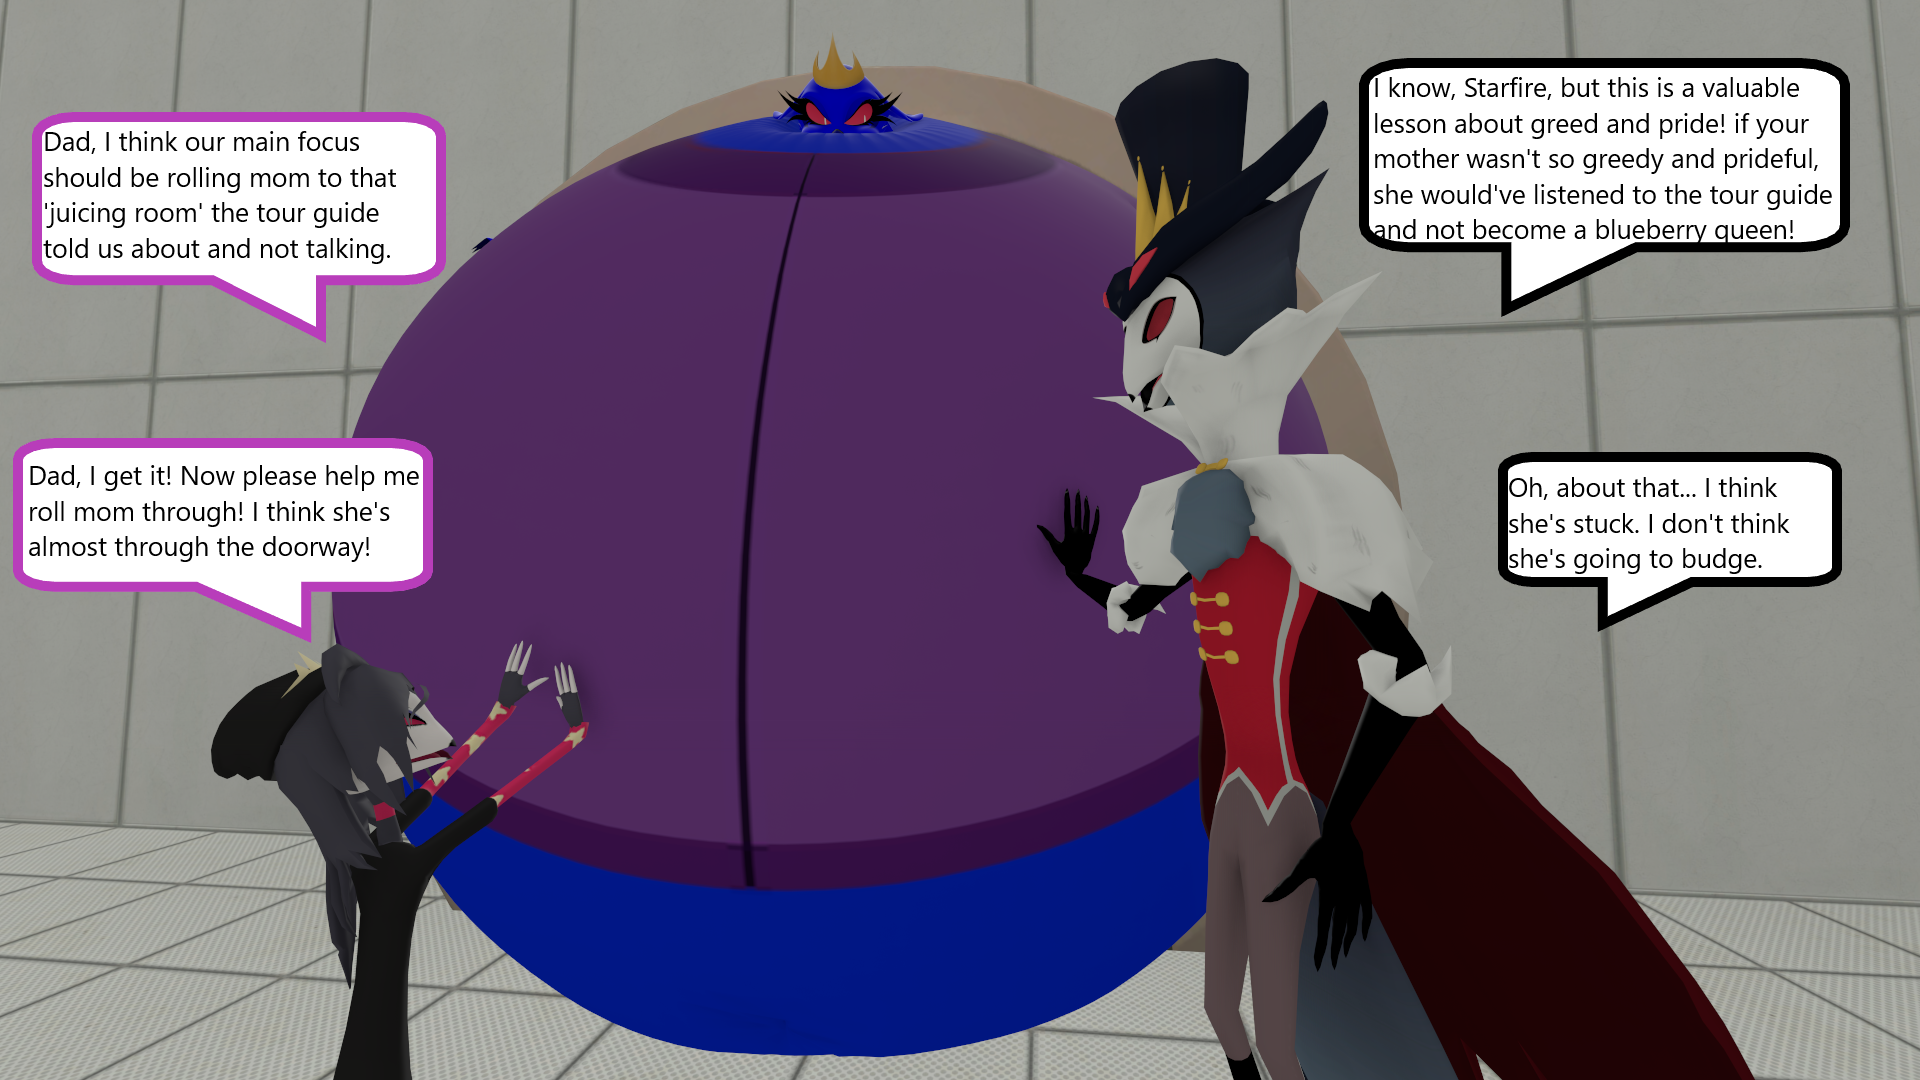 Dragon Blueberry Inflation He did not expect that. Did he? ===========, Blueberry